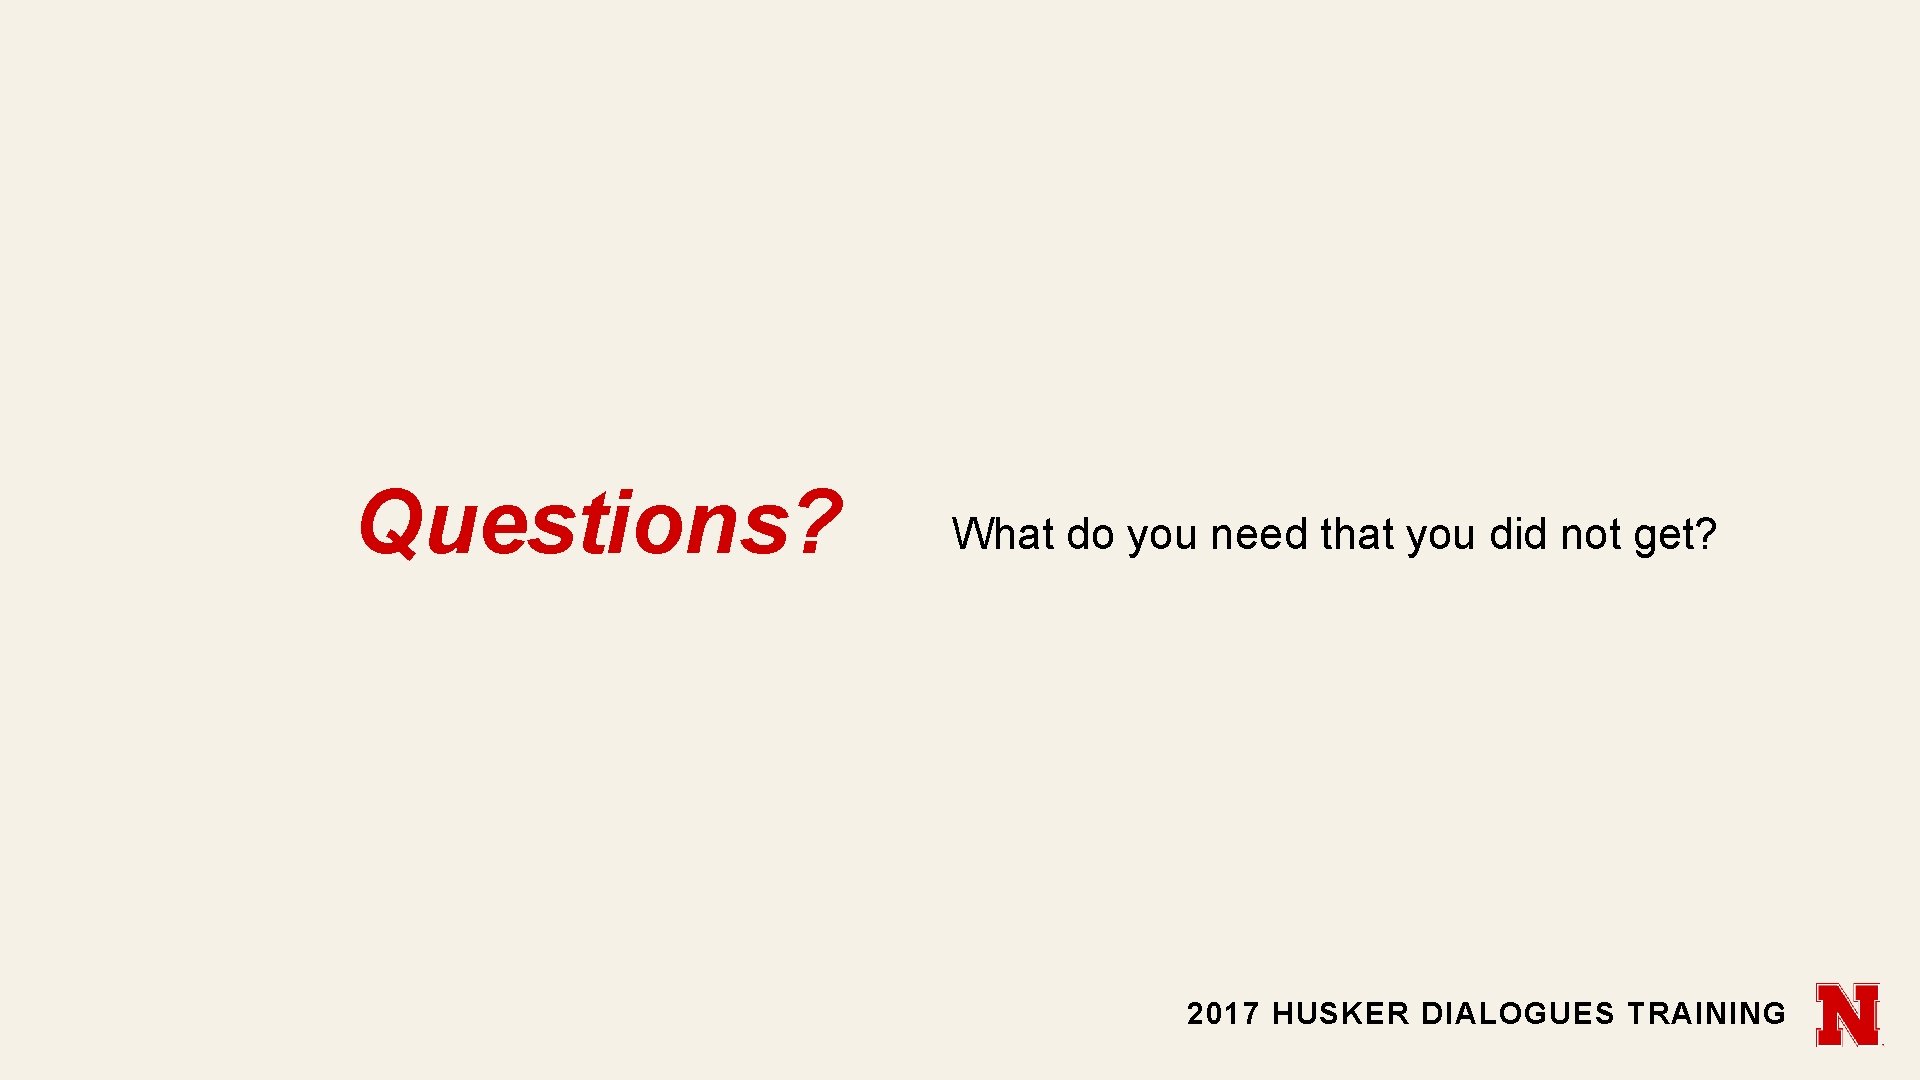 Questions? What do you need that you did not get? 2017 HUSKER DIALOGUES TRAINING